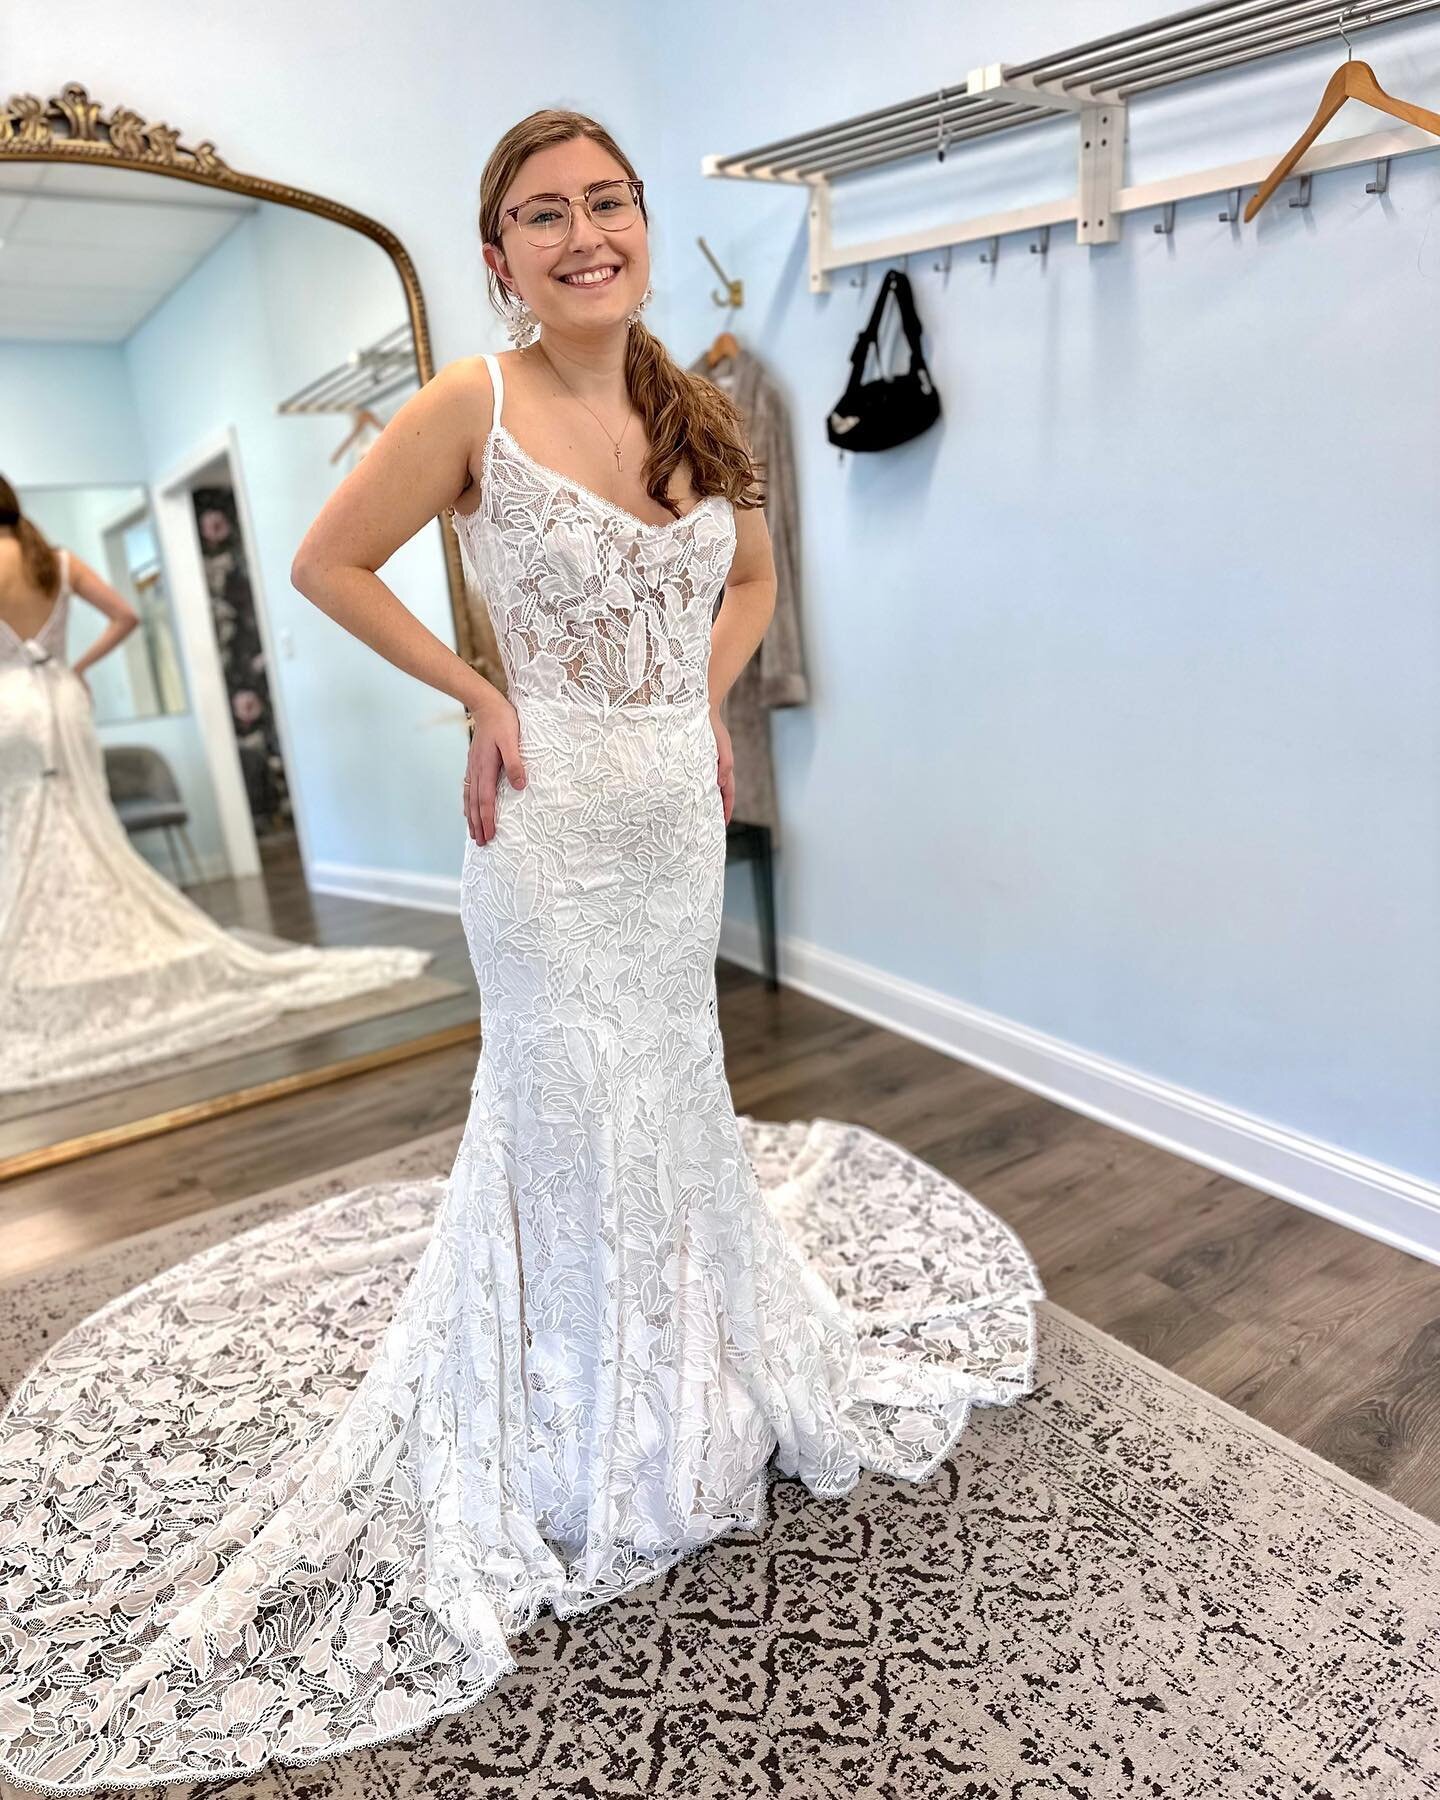 Brand new style #66256 by @bylillianwest is a work art with it&rsquo;s intricate all over lace and scoop neckline 💖 We are smitten! #bsbbride #njbride #2023bride #2024bride #njwedding #bohobride #lillianwest